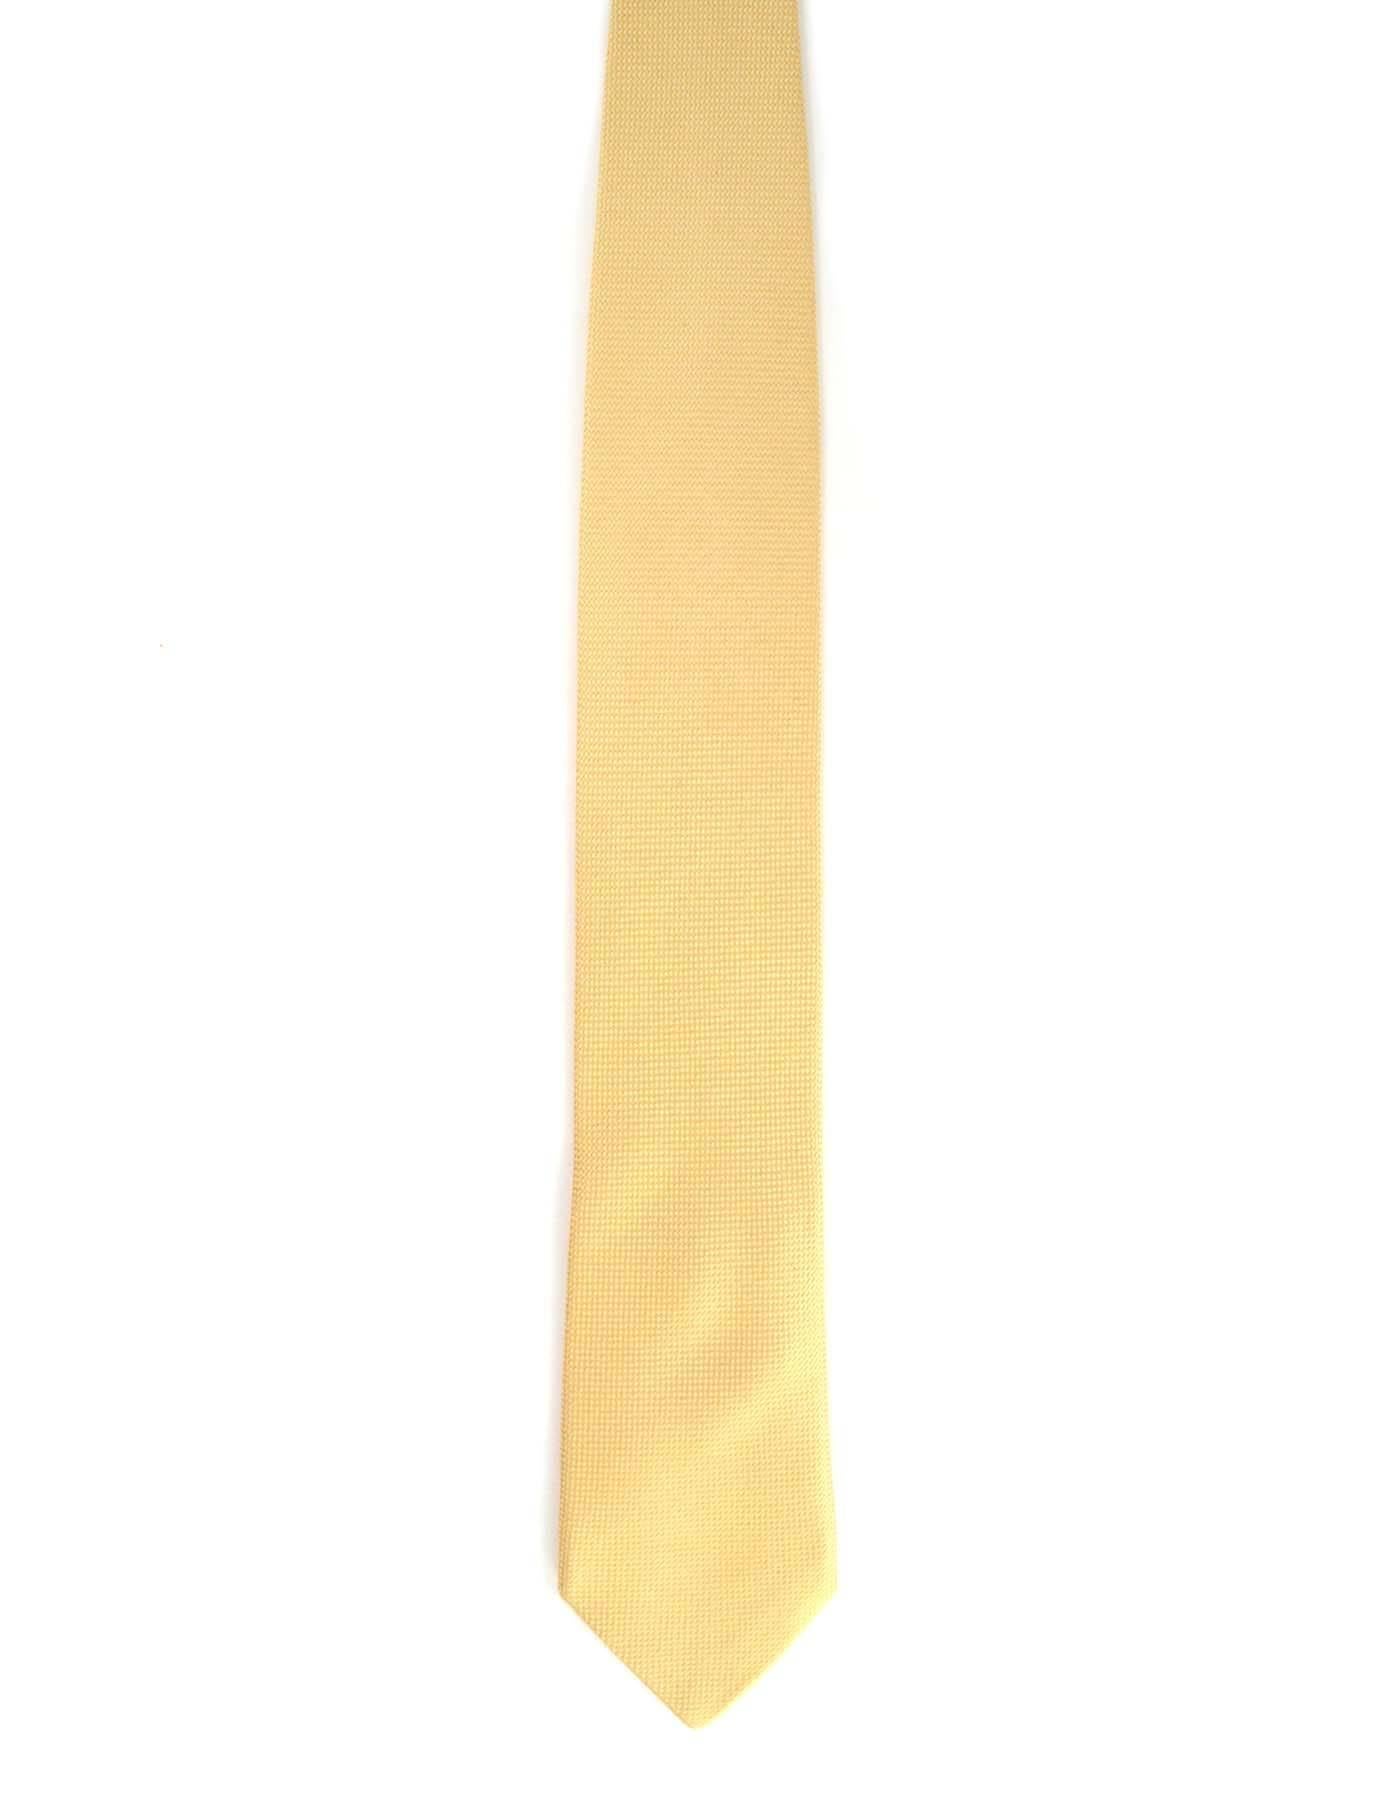 Hermes Gold Woven Silk Tie
Made In: France
Color: Yellow-gold
Composition: 100% silk
Overall Condition: Excellent pre-owned condition with the exception of a few small pulls to front
Measurements: 
Length: 59